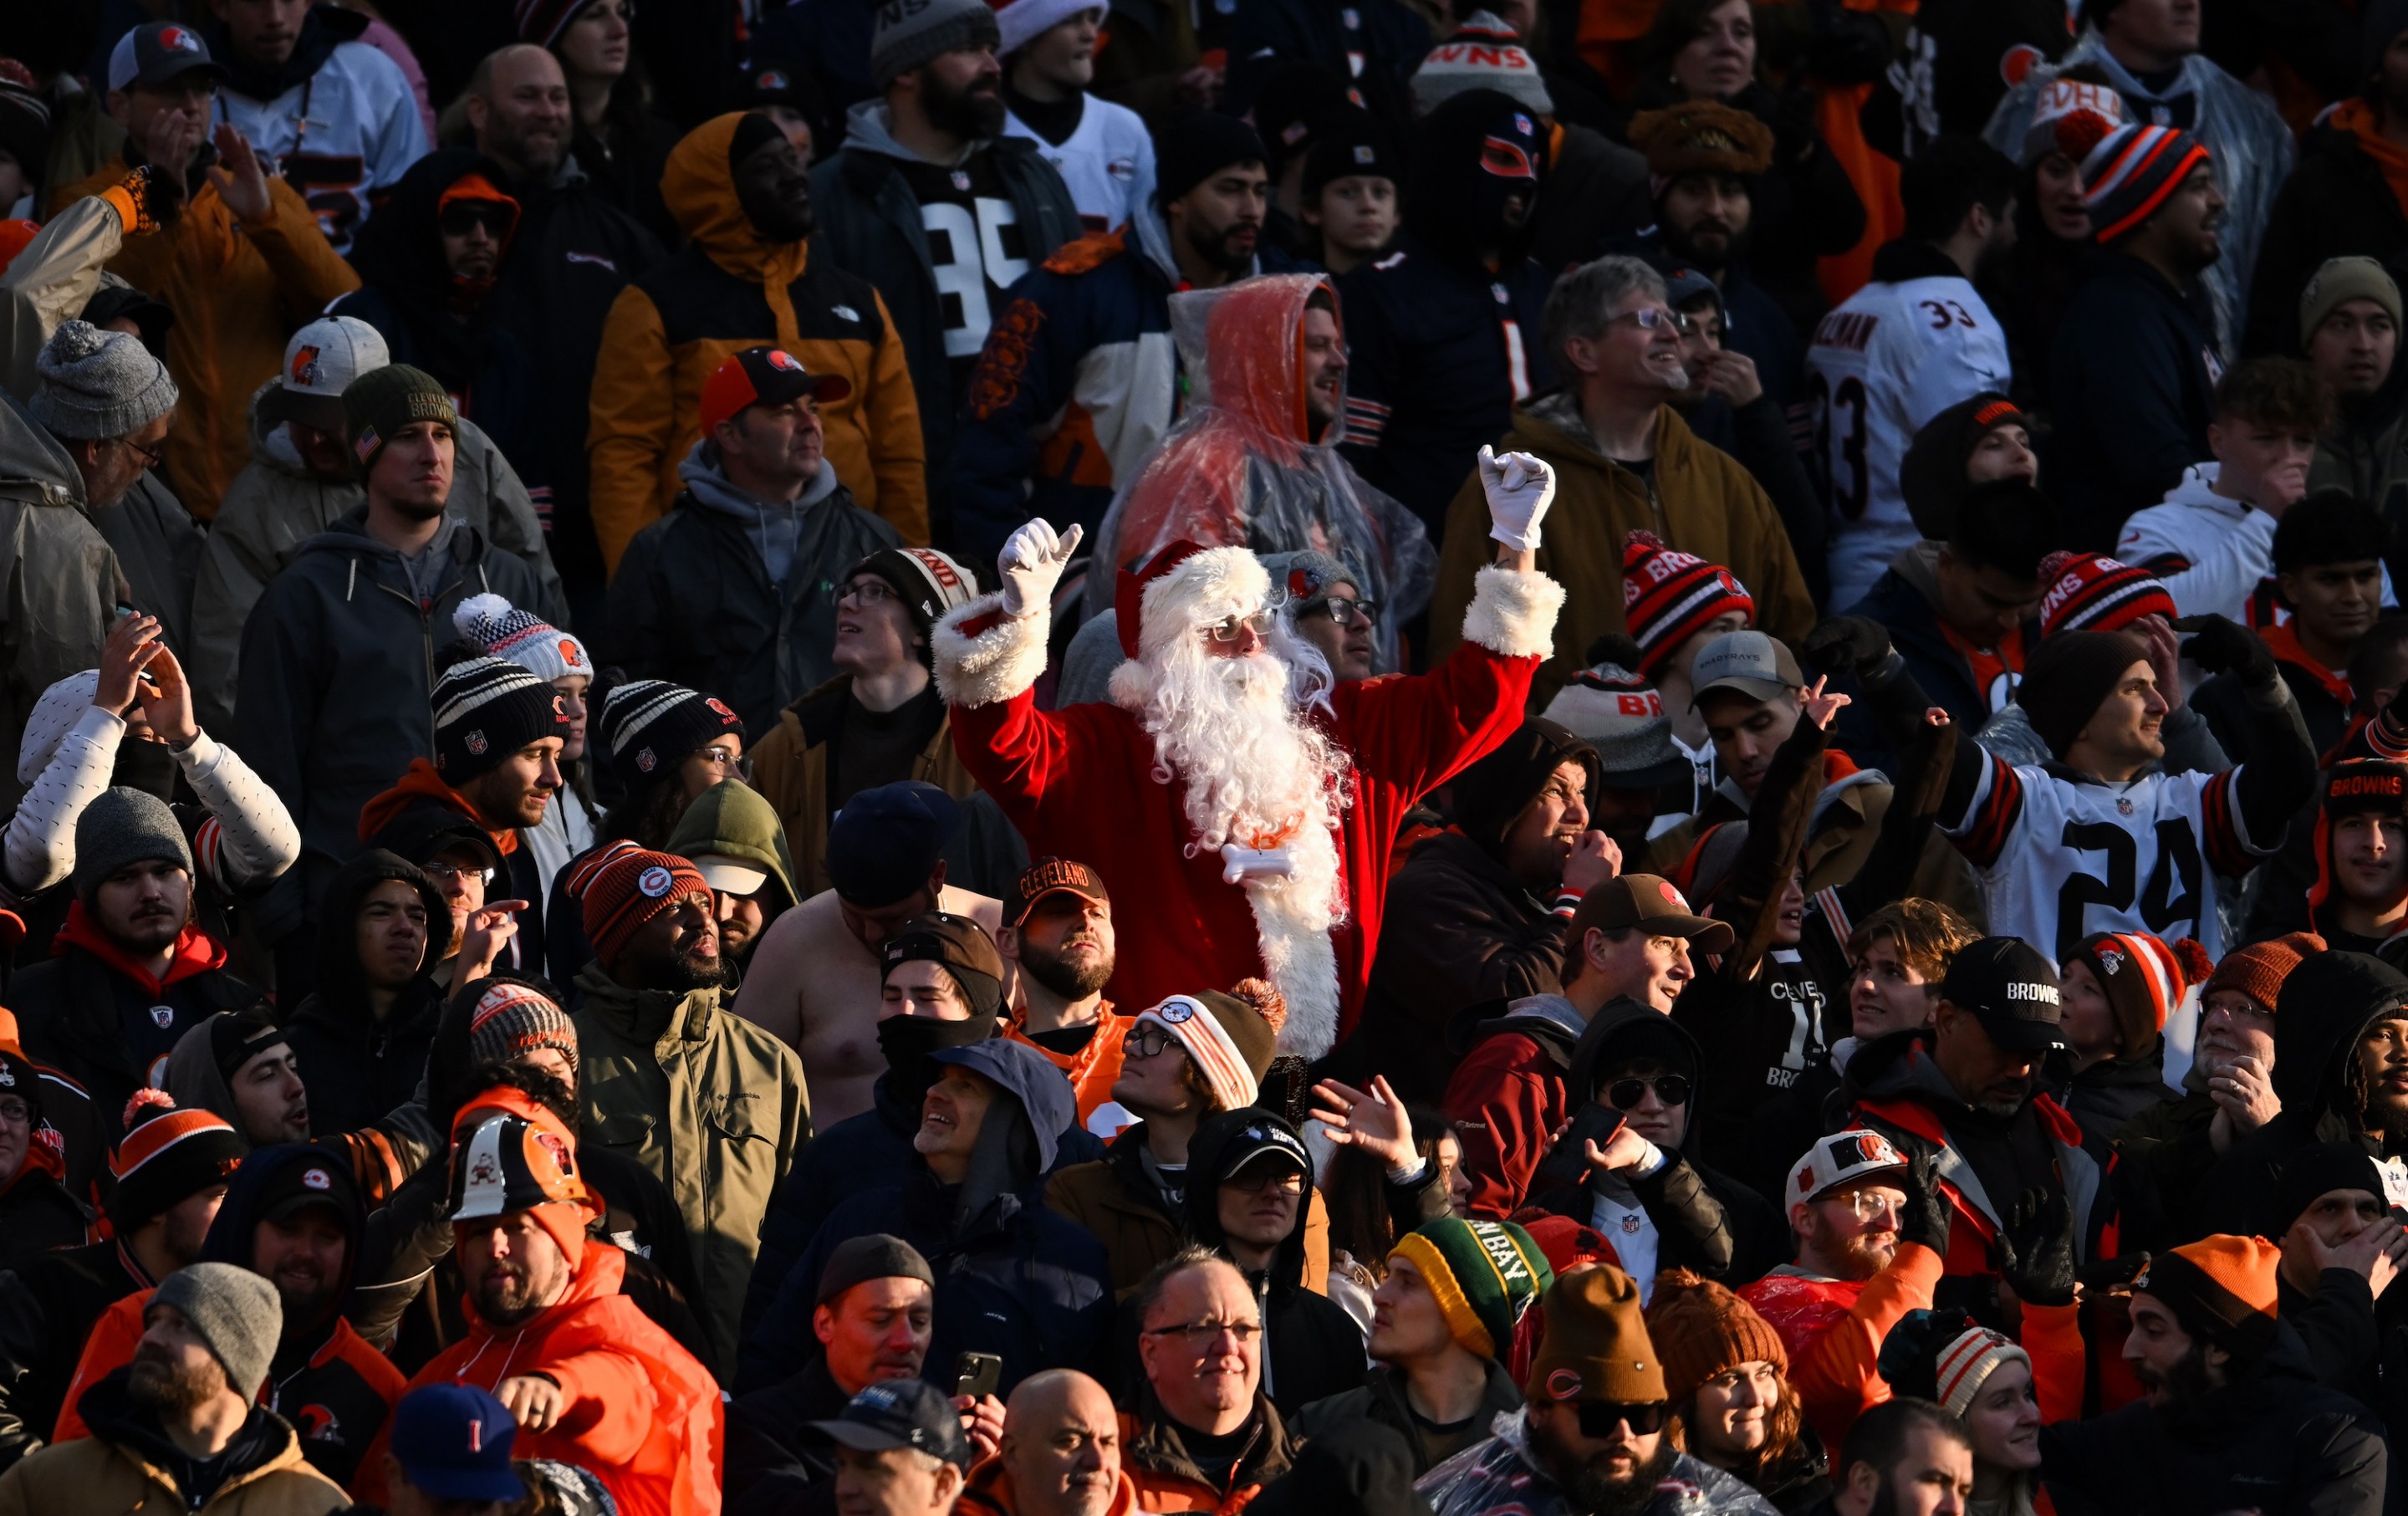 CLEVELAND, OHIO - DECEMBER 17: A fan dressed as Santa Claus cheers during the second half between the Chicago Bears and the Cleveland Browns at Cleveland Browns Stadium on December 17, 2023 in Cleveland, Ohio. (Photo by Nick Cammett/Diamond Images via Getty Images) *** Local Caption *** Santa Claus